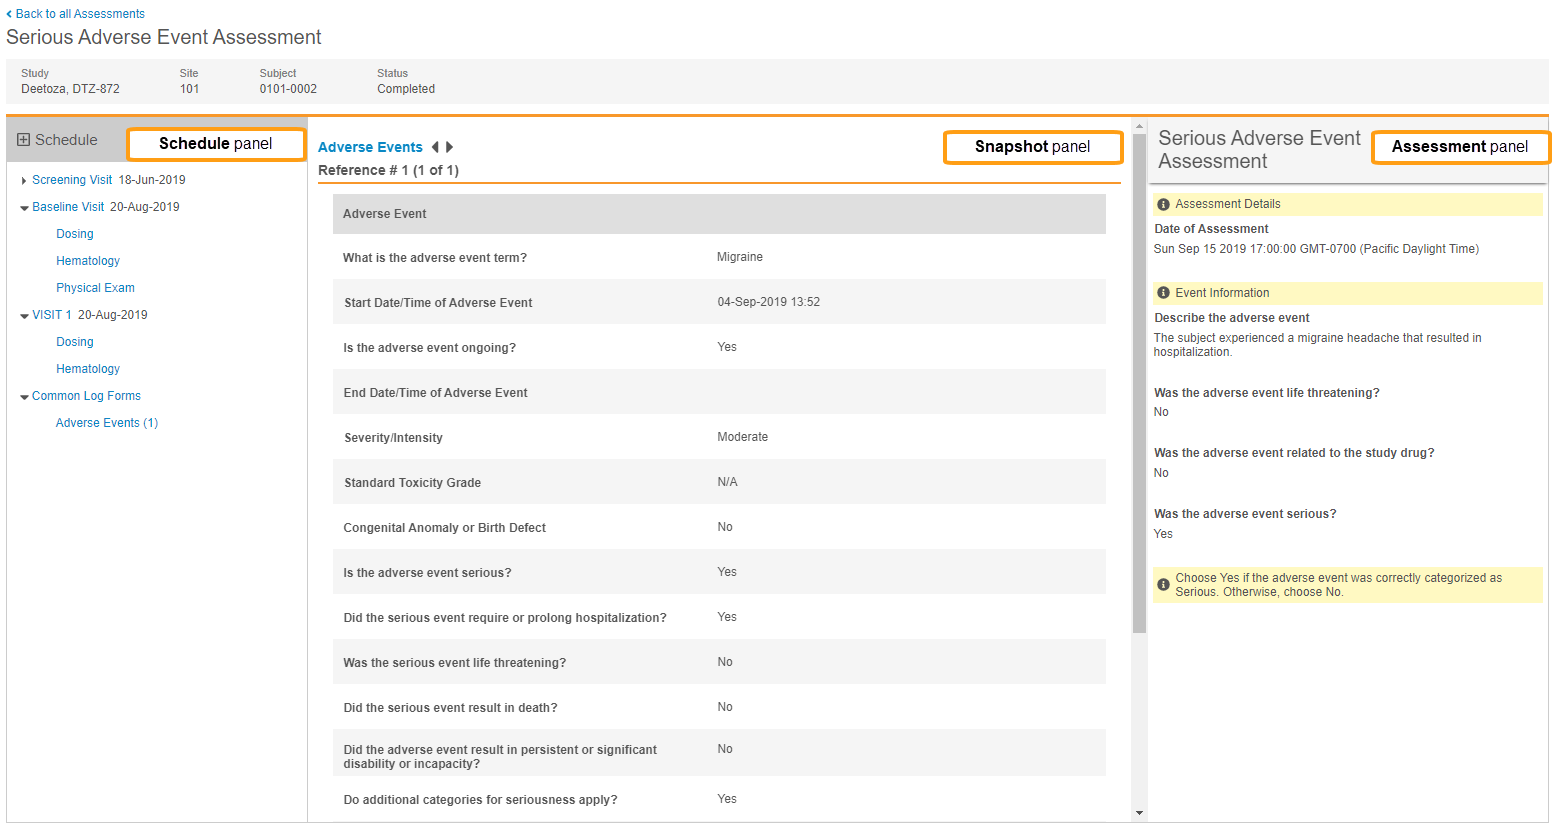 Schedule, Snapshot, and Assessment panel on the Assessment Questionnaire page